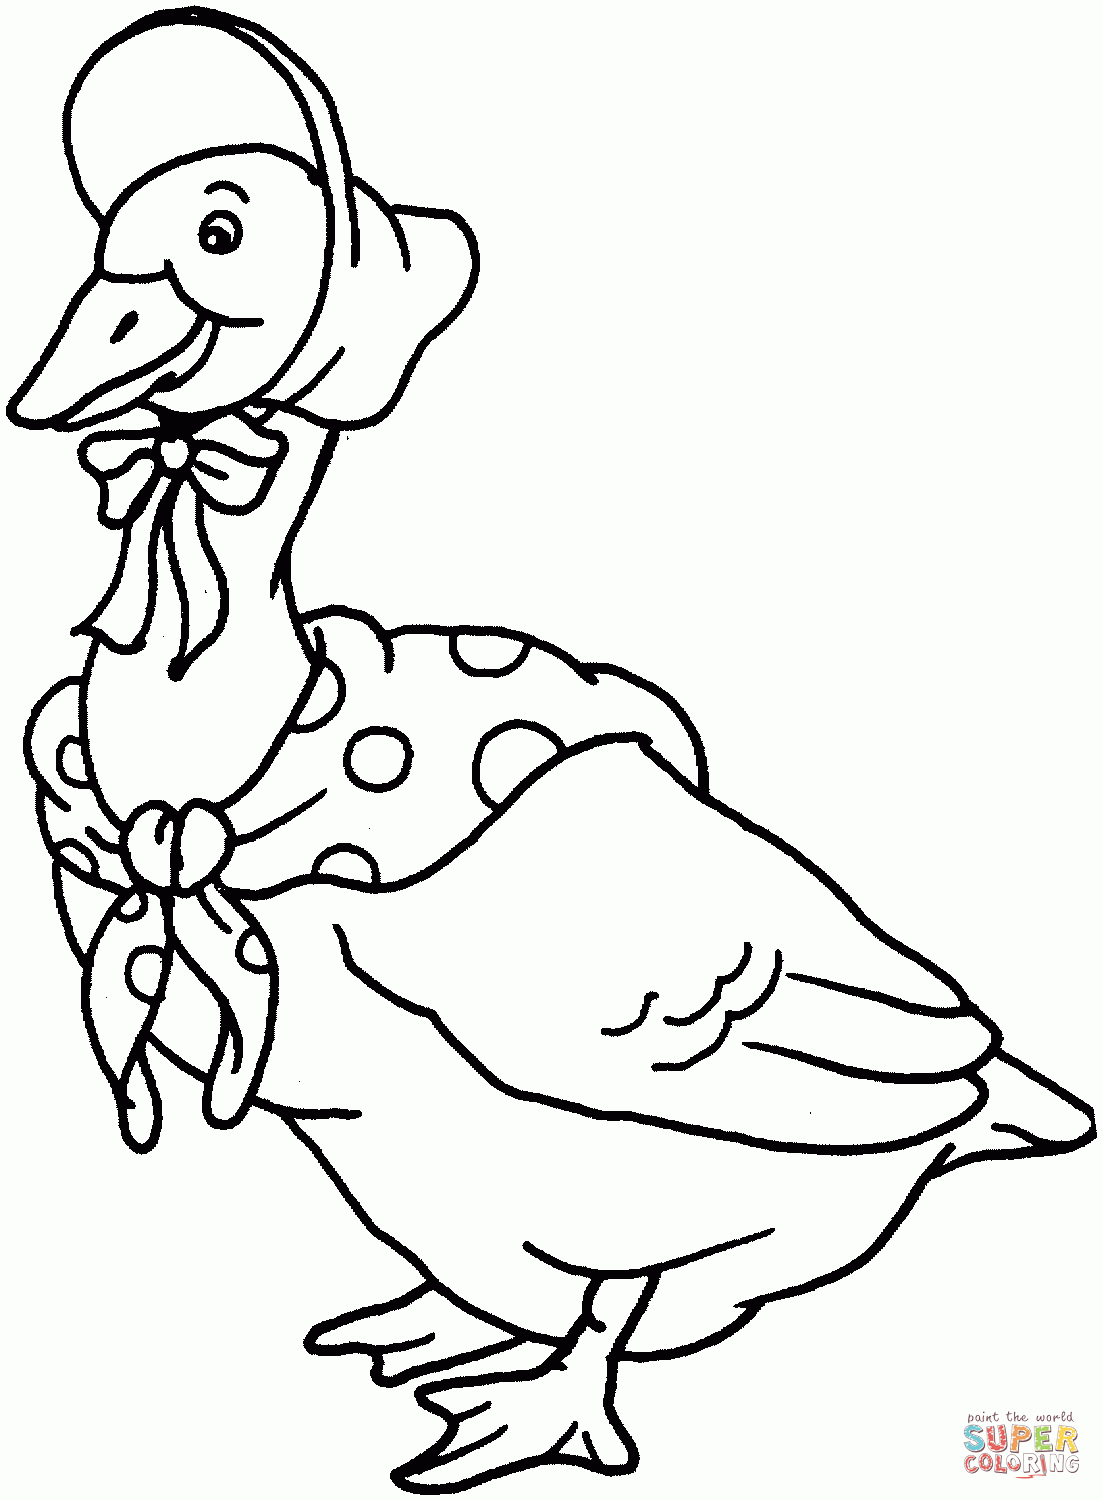 Mother Goose Coloring Page | Free Printable Coloring Pages - Mother Goose Coloring Pages Free Printable